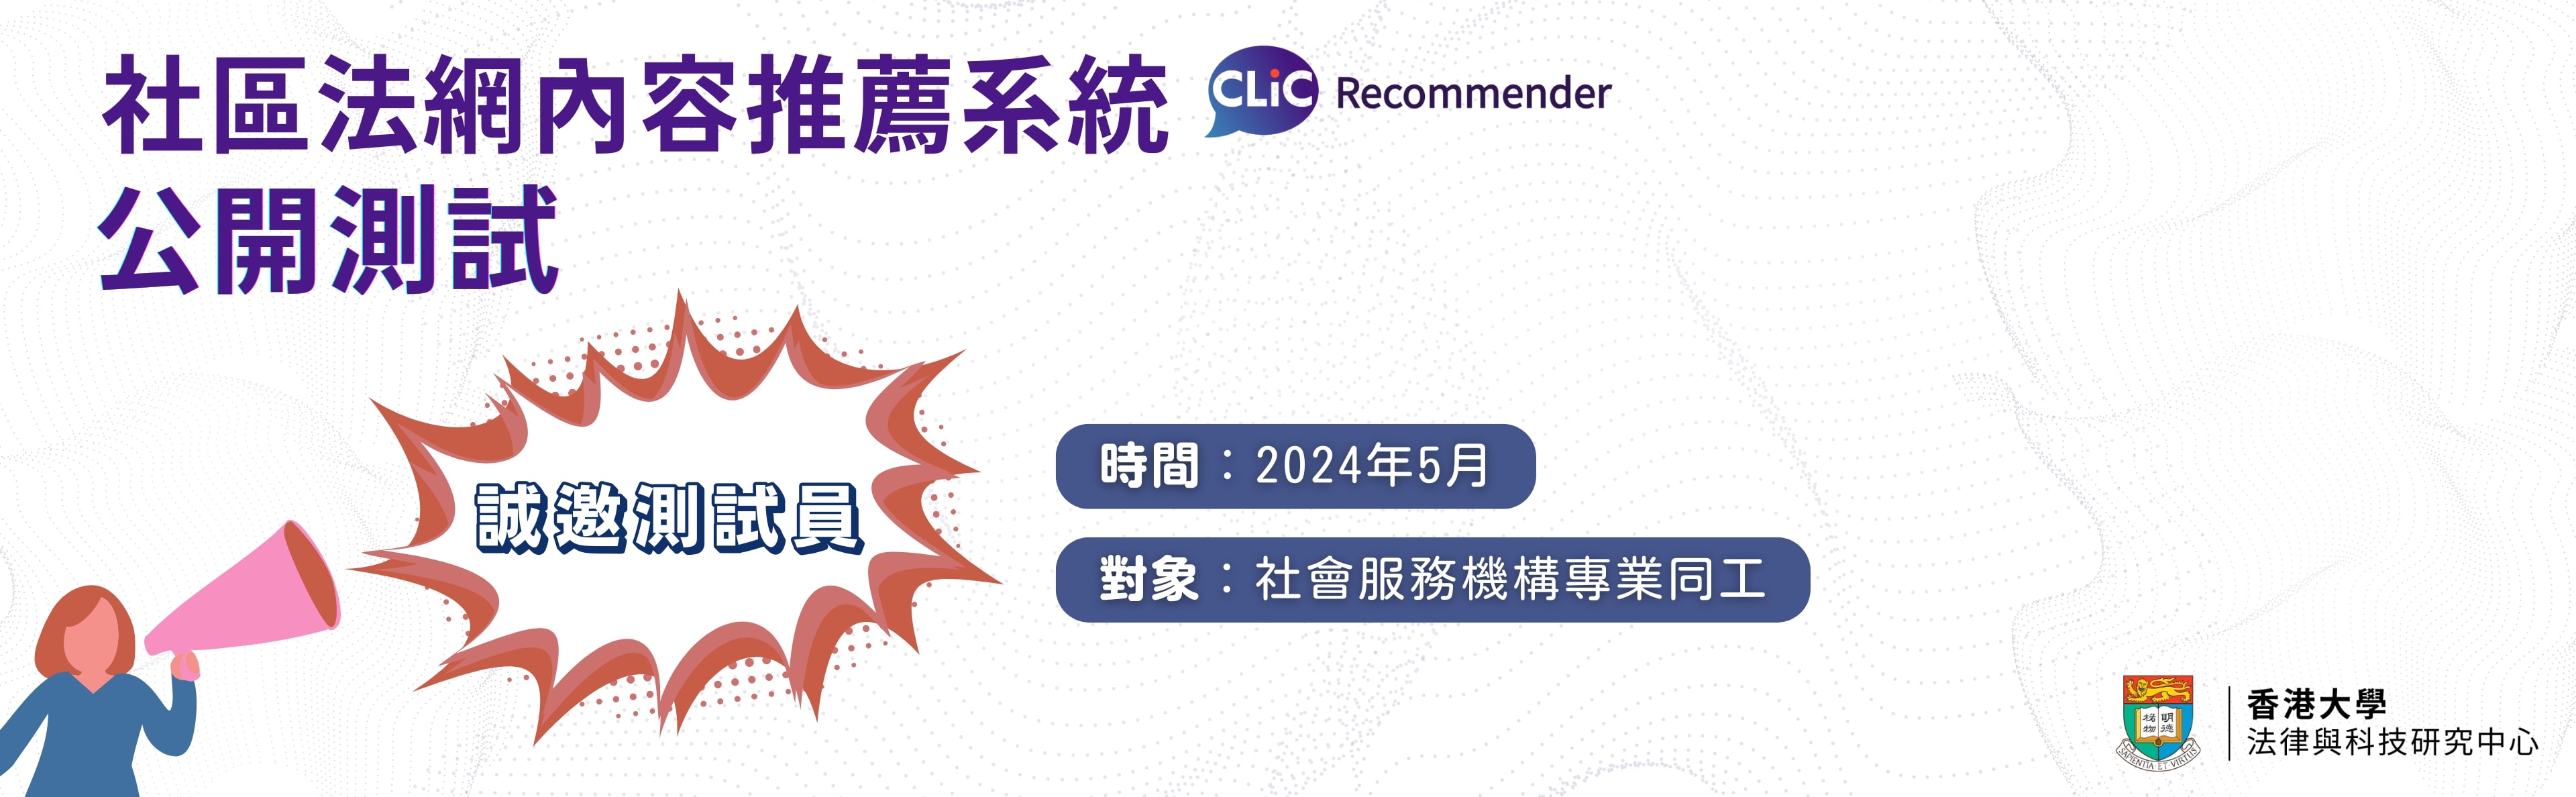 Public Test of CLIC Recommender